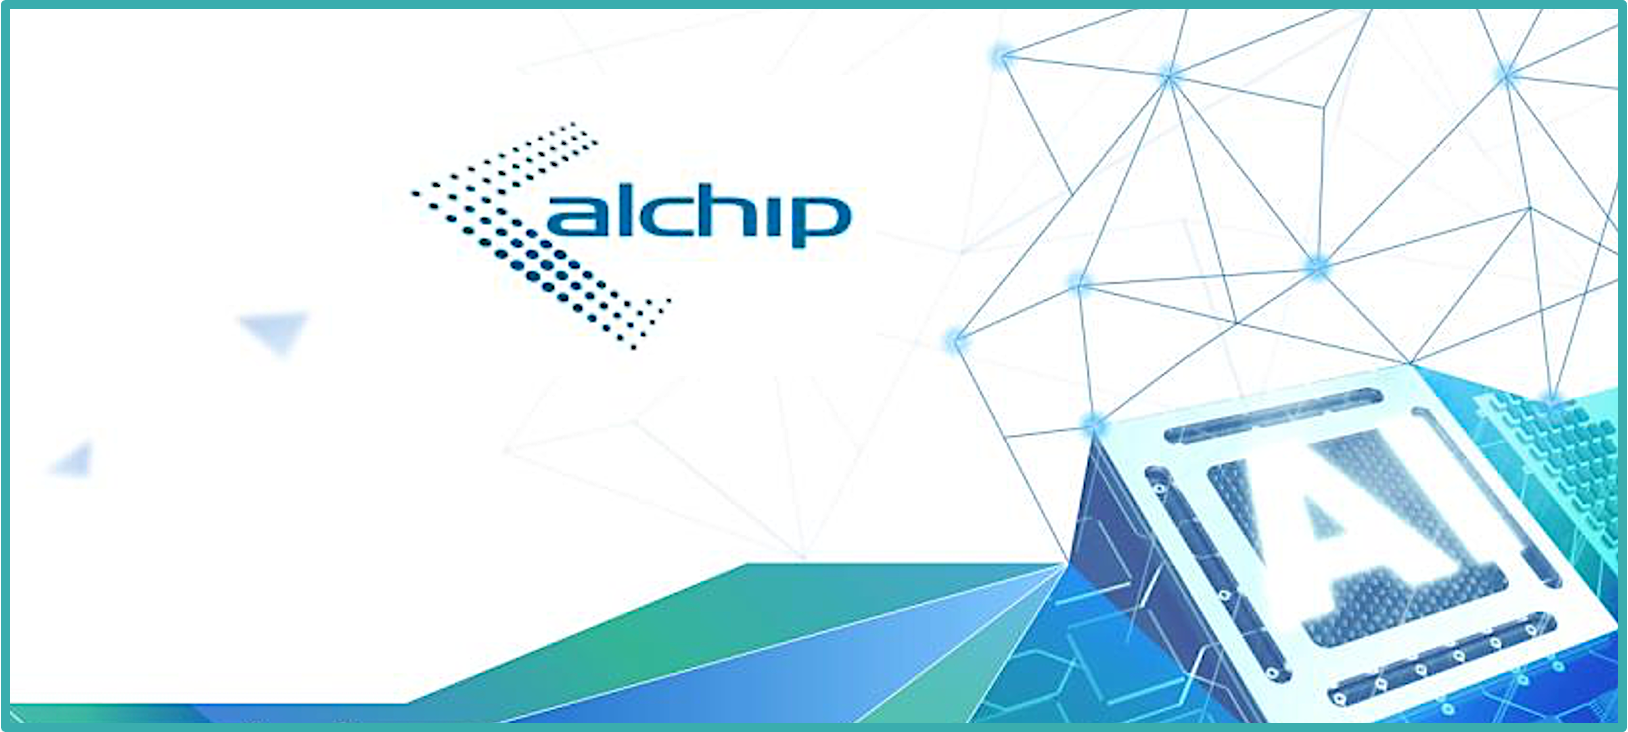 Alchip Reveals How to Extend Moores Law at TSMC OIP Ecosystem Forum